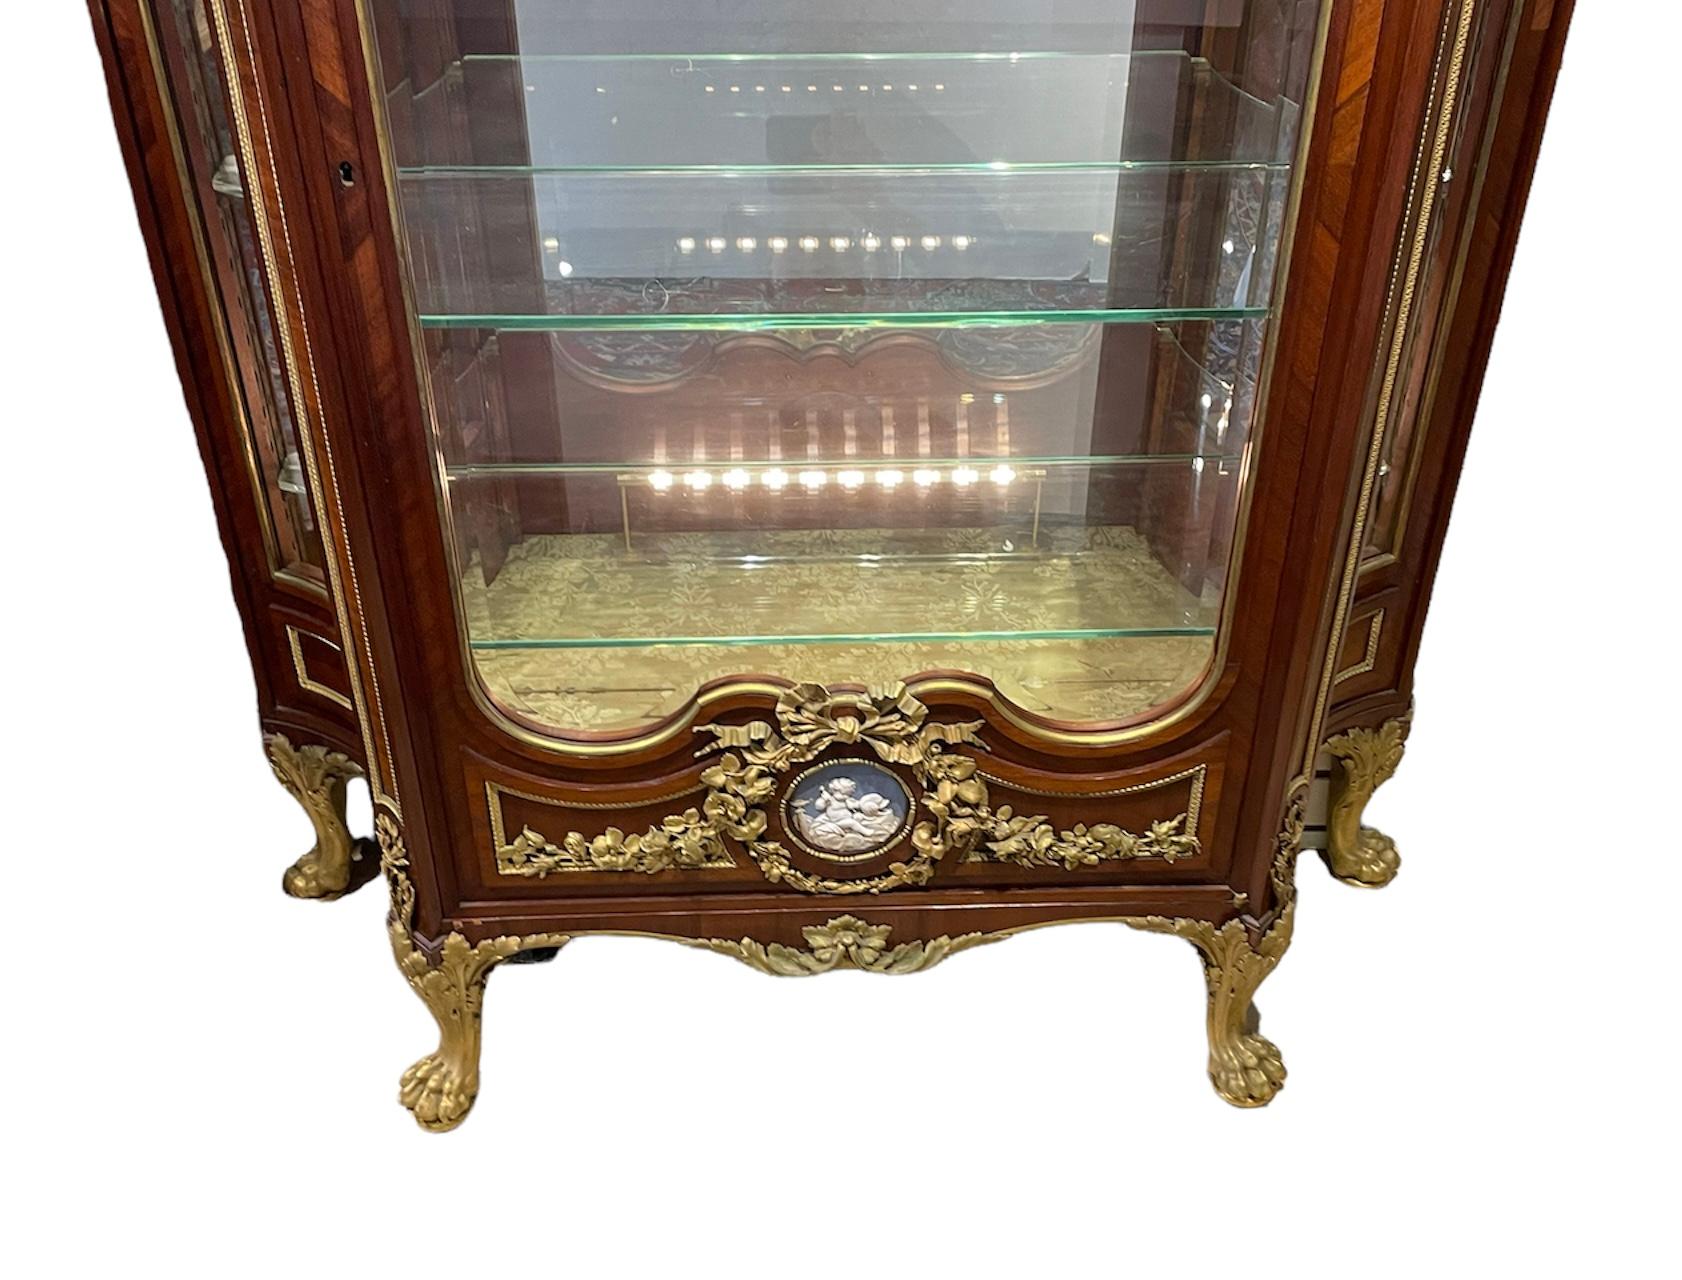 Hand-Crafted Empire Style Maison Krieger Wood, Glass, Bronze And Marble Vitrine Cabinet For Sale